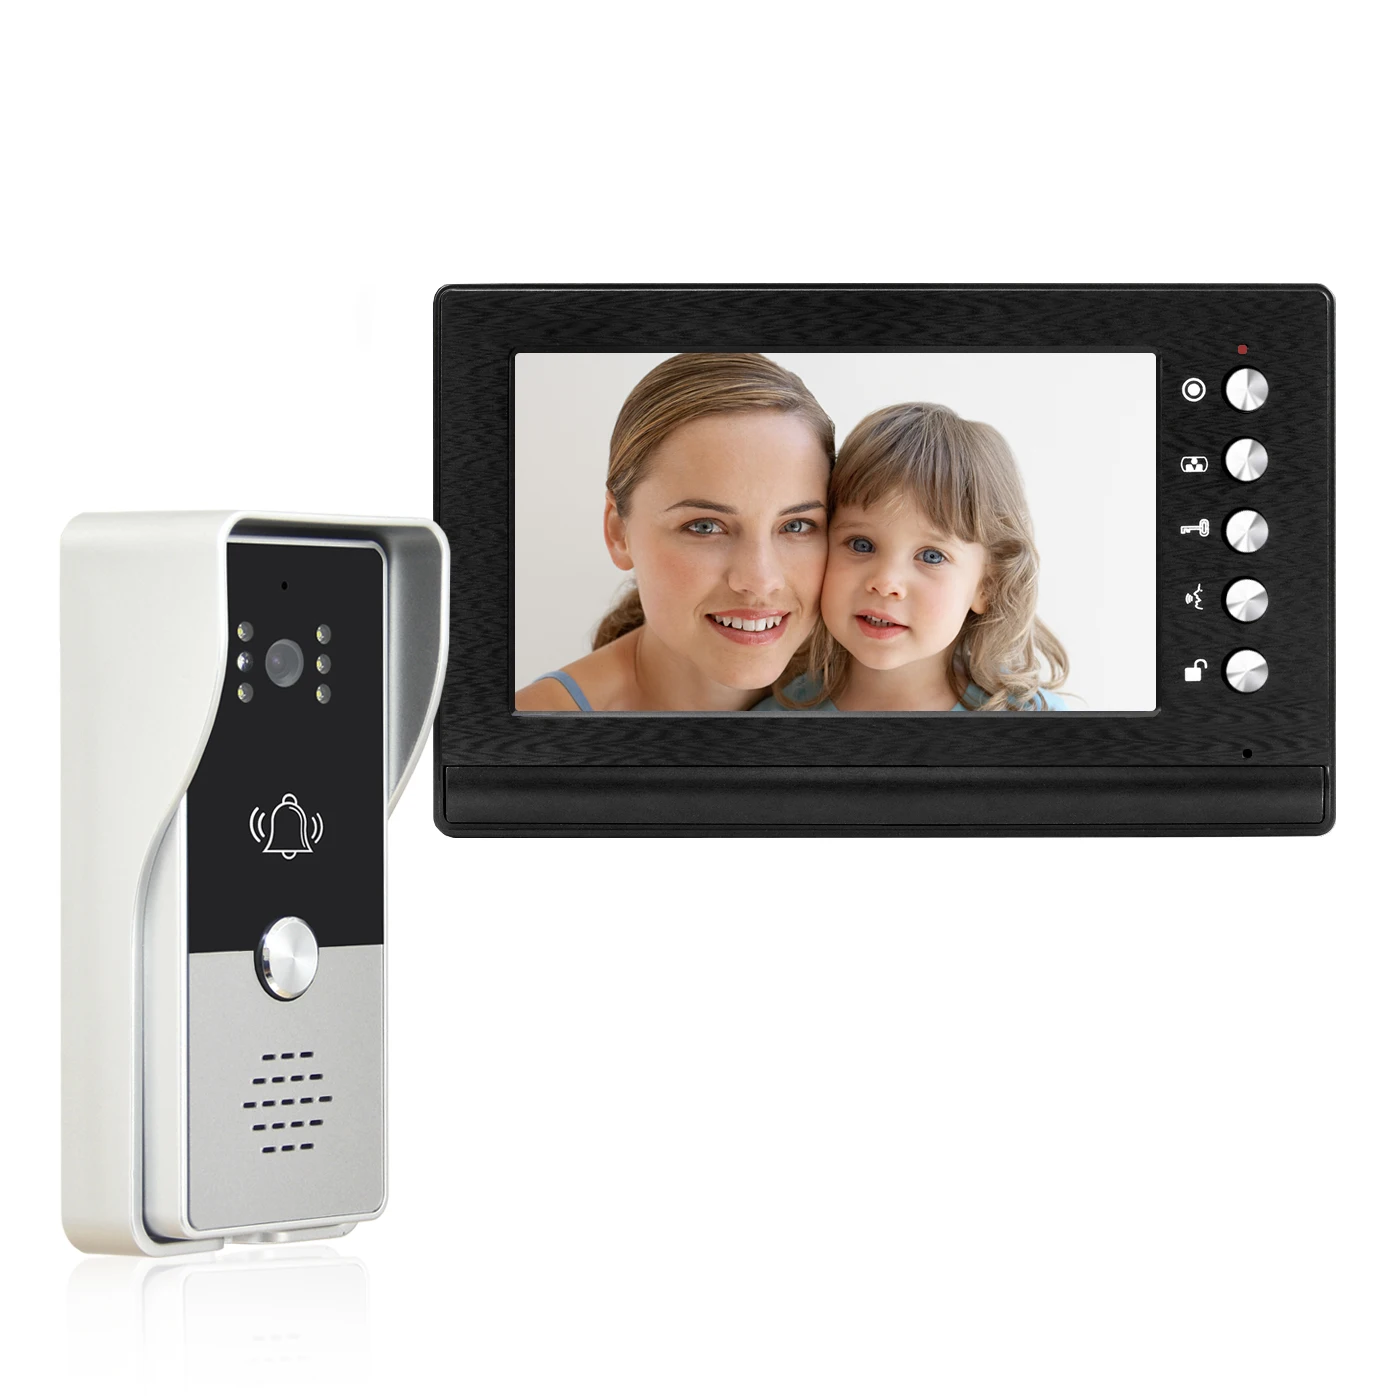 7 inch Video Intercom Doorbell System for Home Security with IR Camera LCD Monitor Video Door Phone Kit for Home Houses Villa